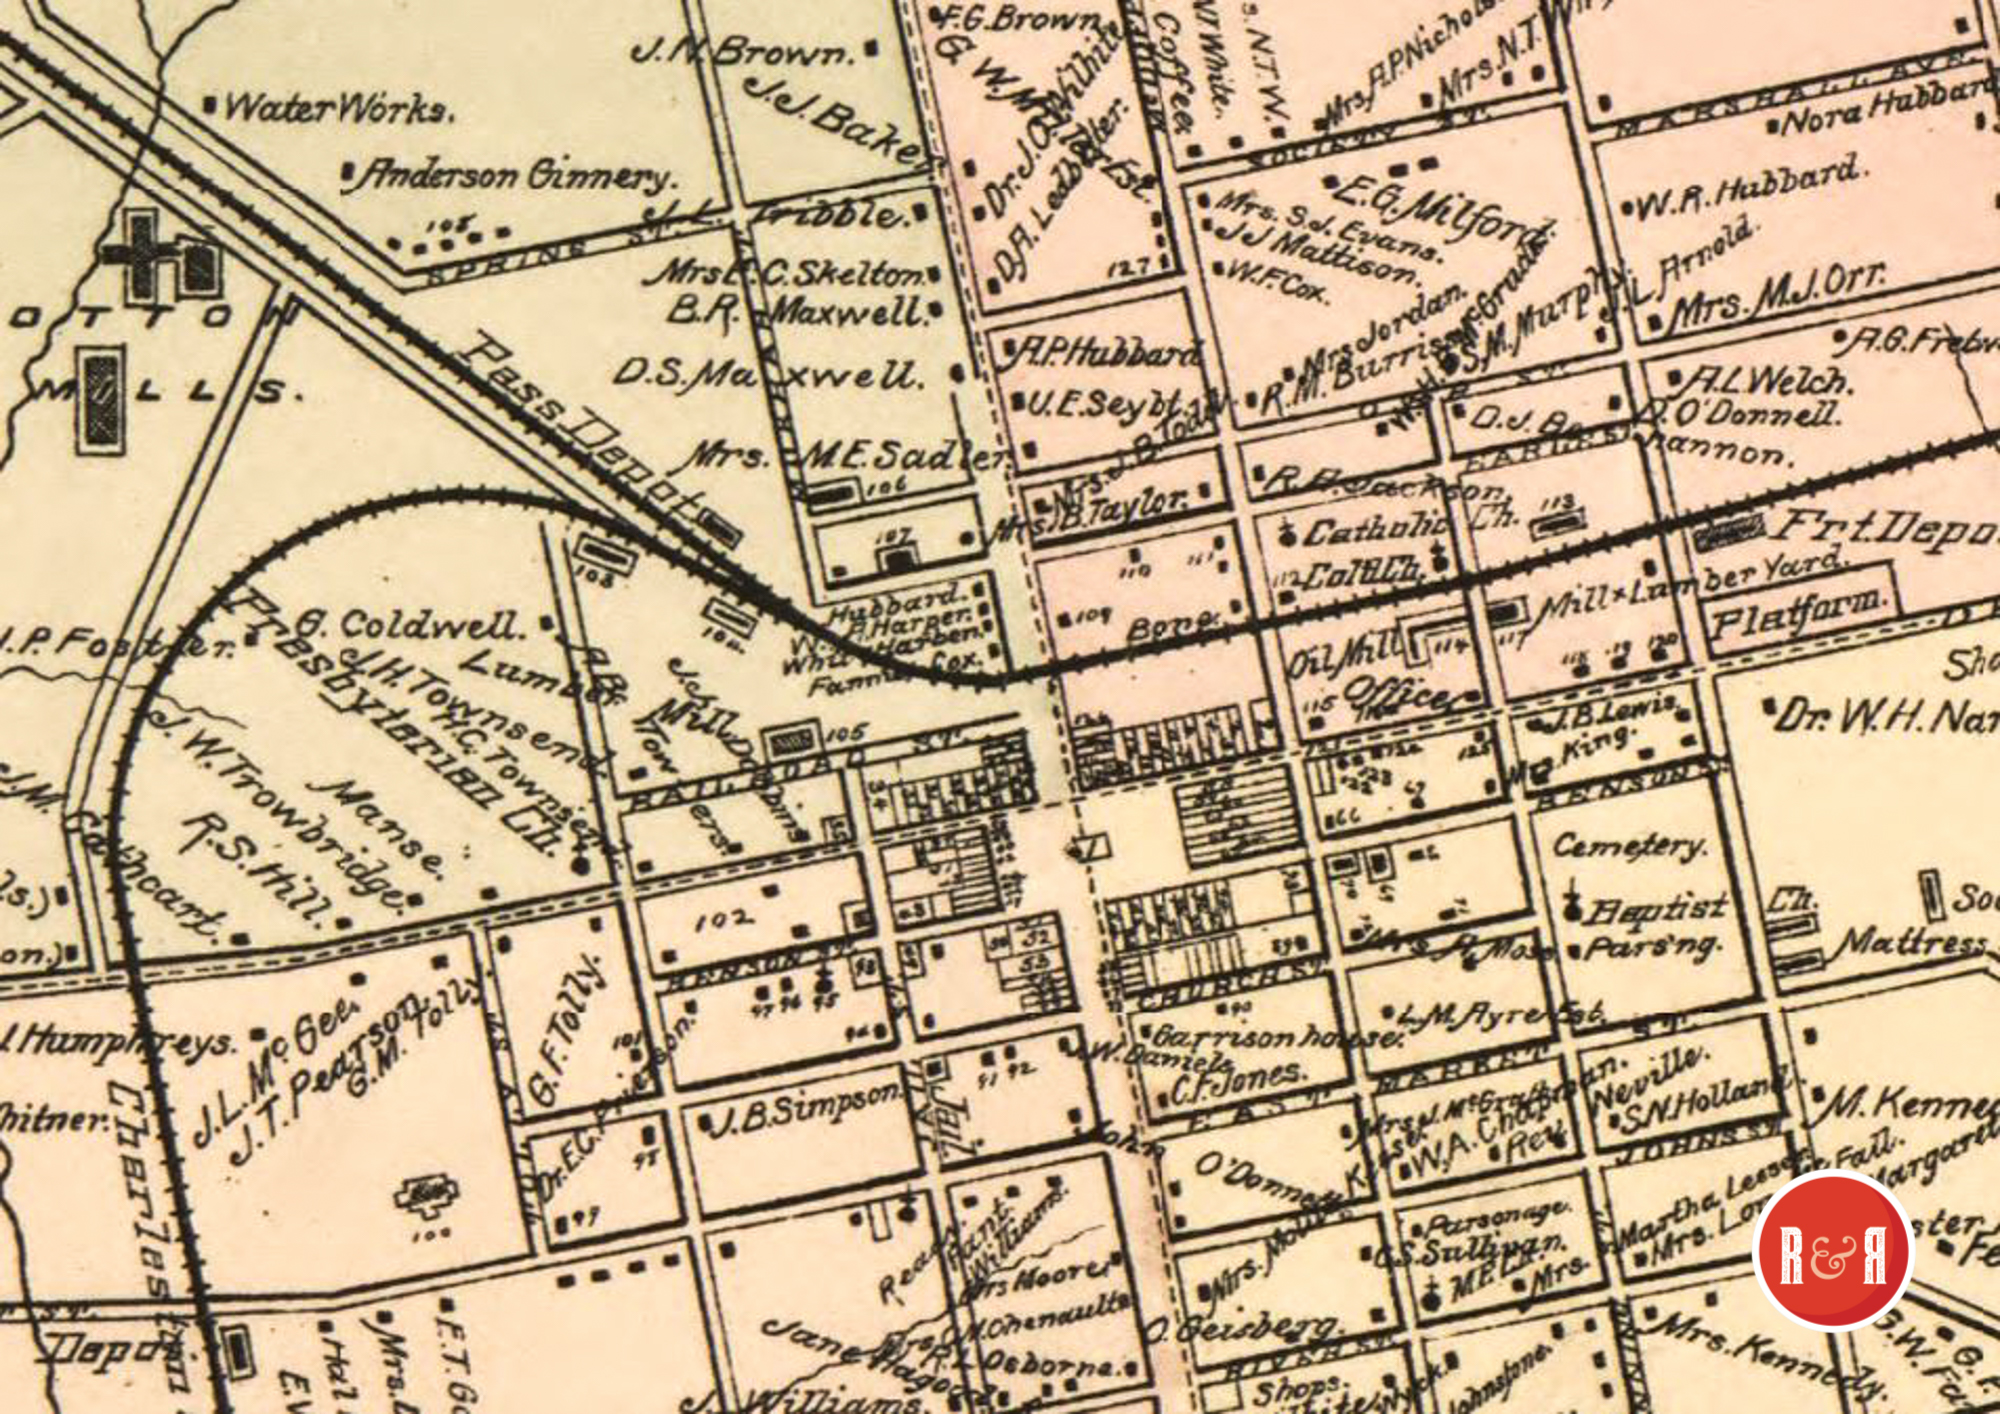 1896 - MAP ENLARGEMENT OF DOWNTOWN ANDERSON SC